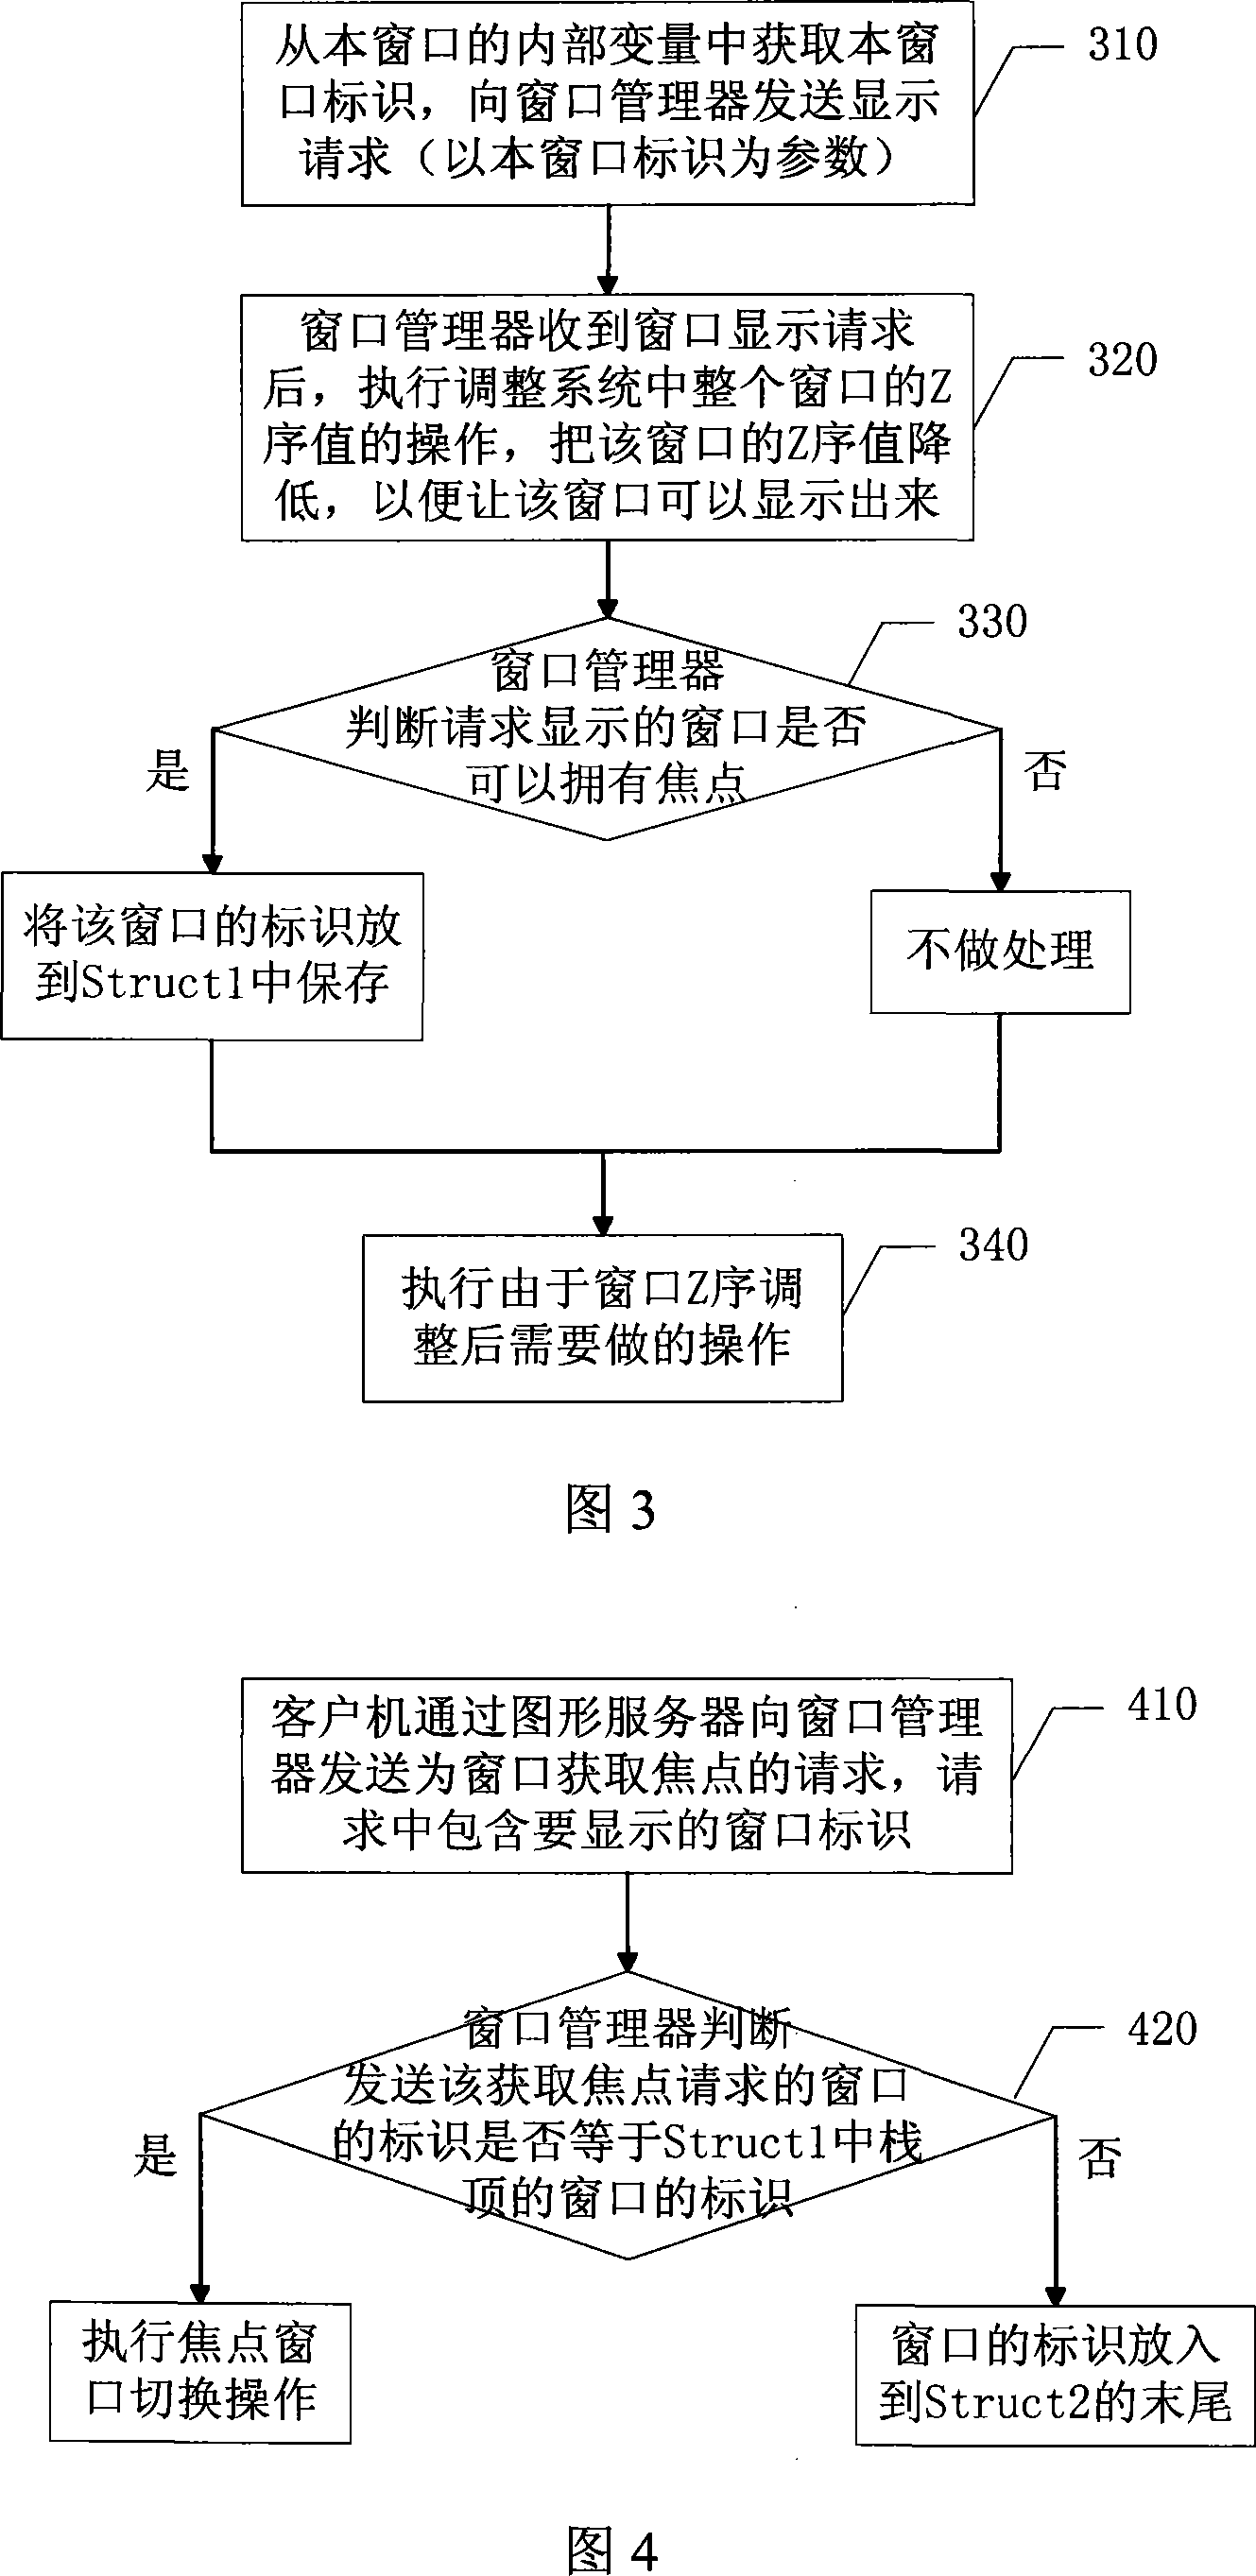 Window management method in mobile phone graphic system